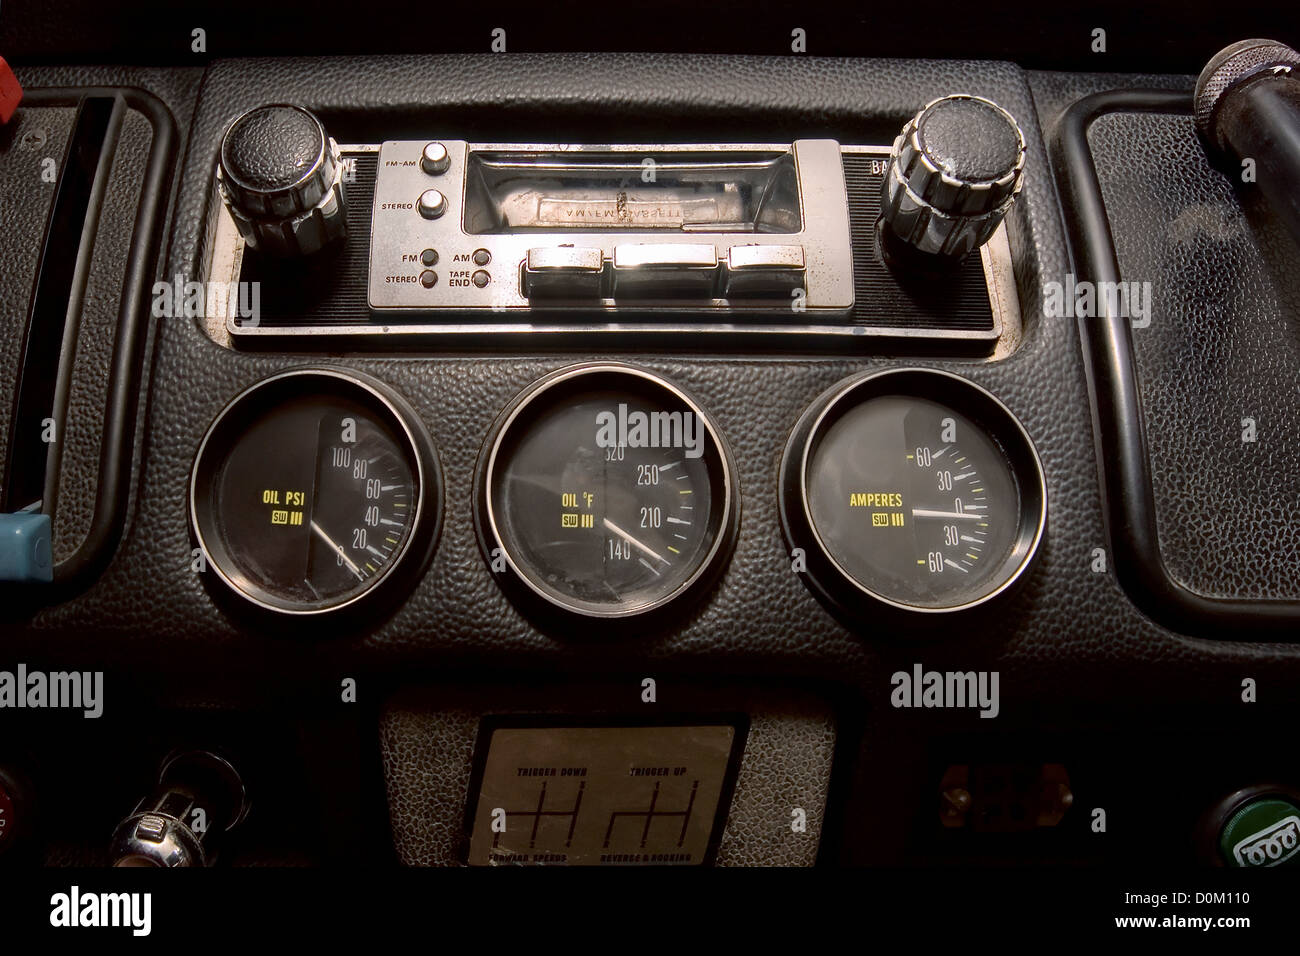 Dashboard and Cassette Player of 1976 Volkswagen Bus Stock Photo